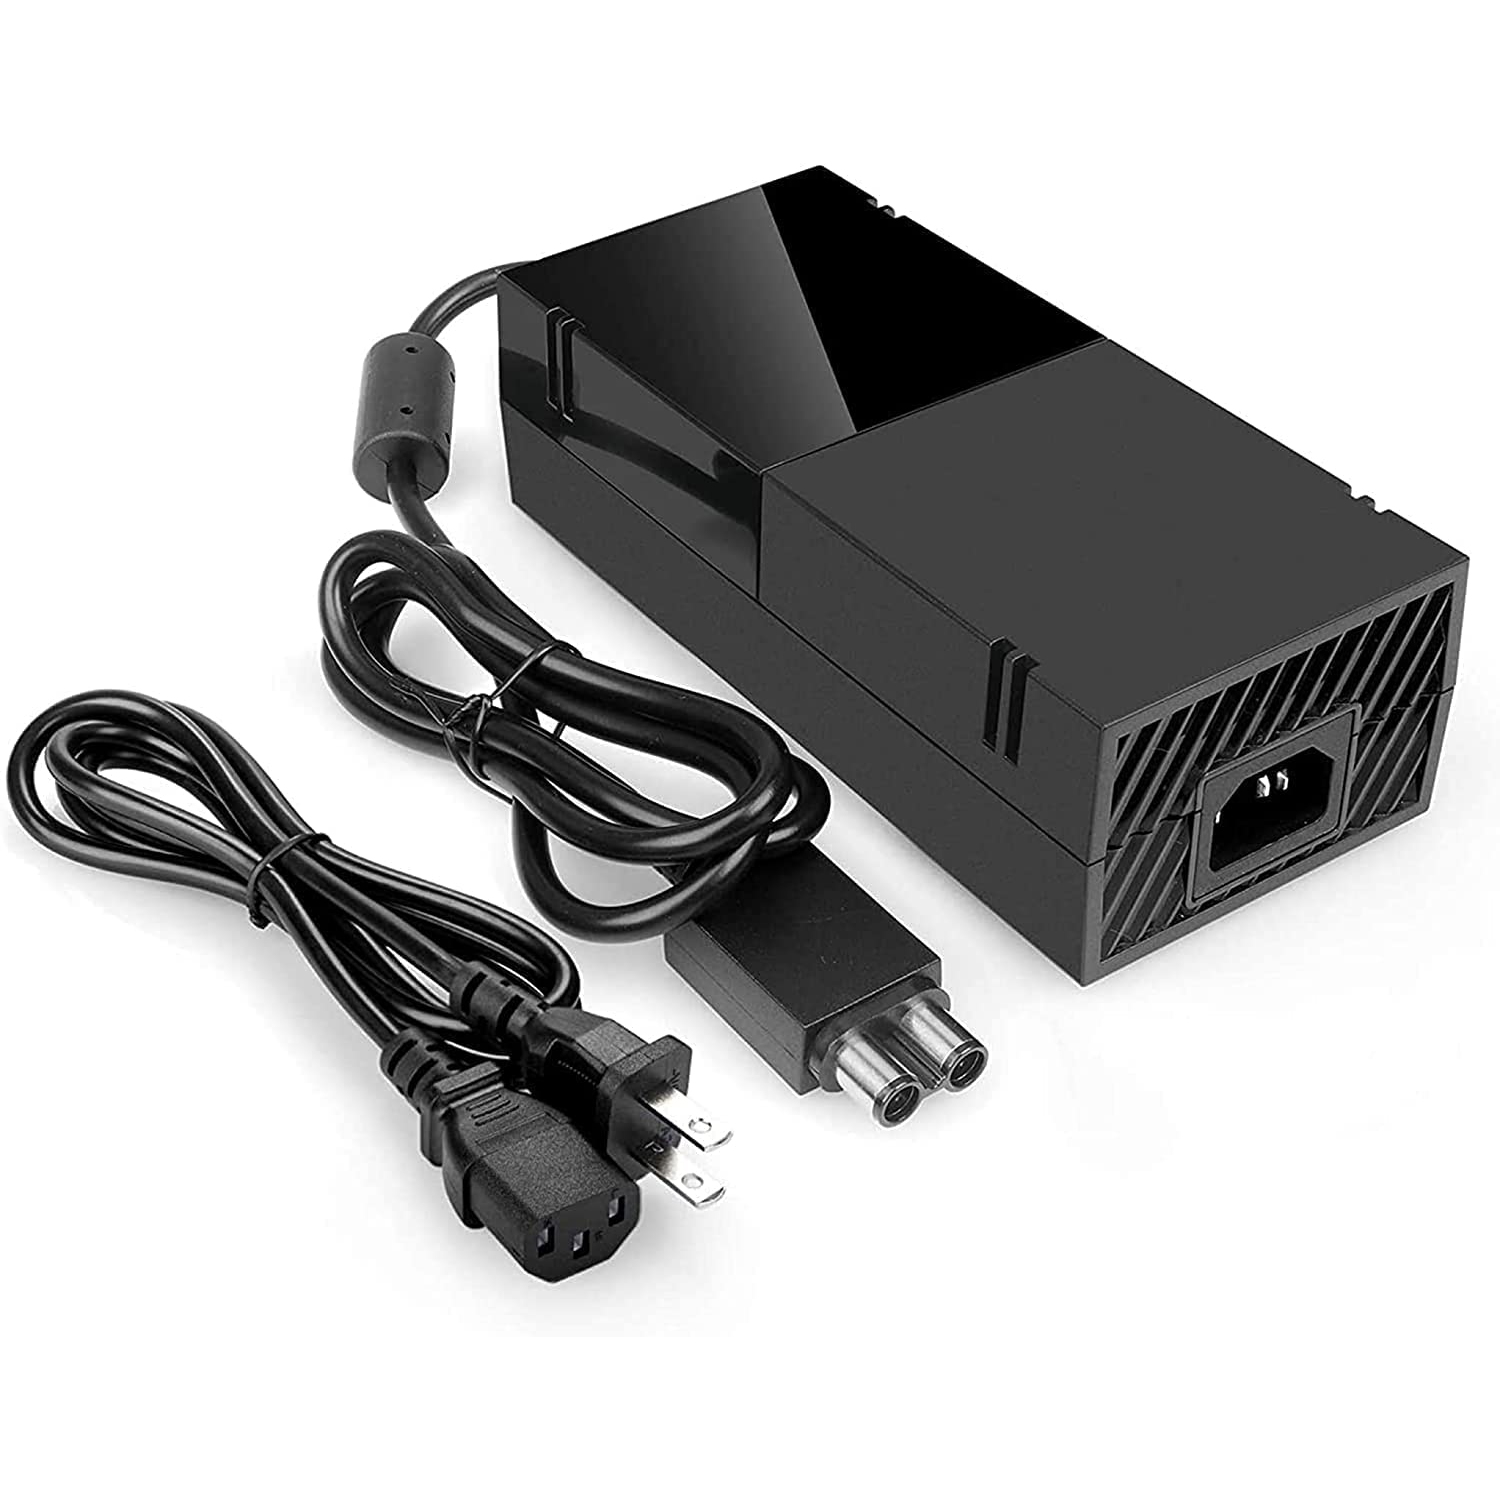 Power Supply Brick for Xbox One with Power Cord, (Low Noise Version) AC Adapter Power Supply Charge for Xbox One